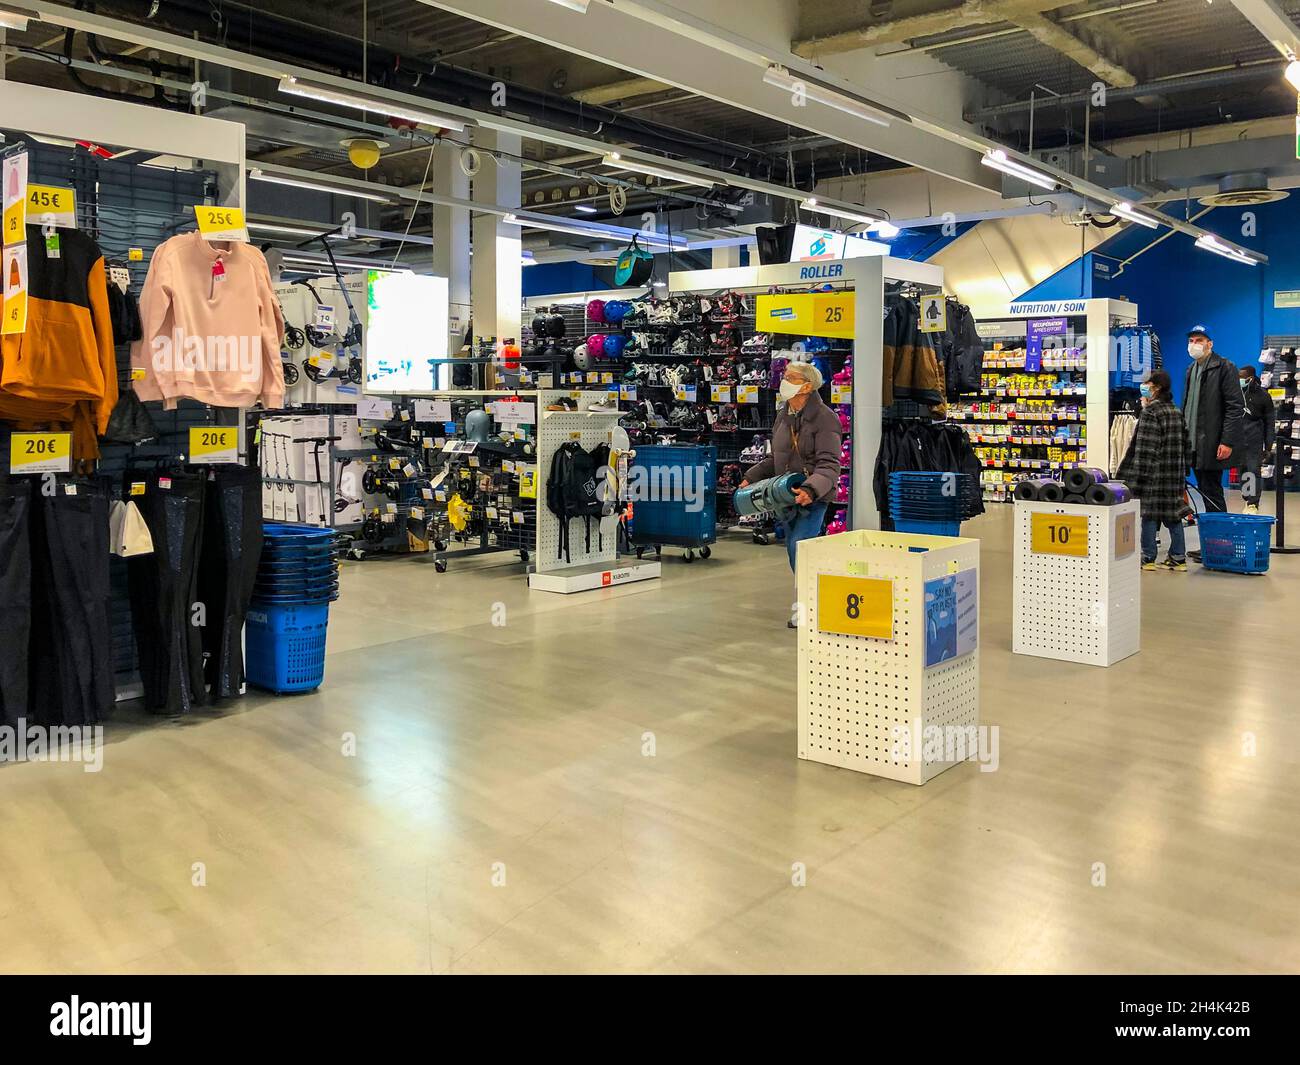 Paris, France, People Shopping in Sports Store, inside using automatic checkout machines Decathlon Rive Gauche, modern interiors Stock Photo